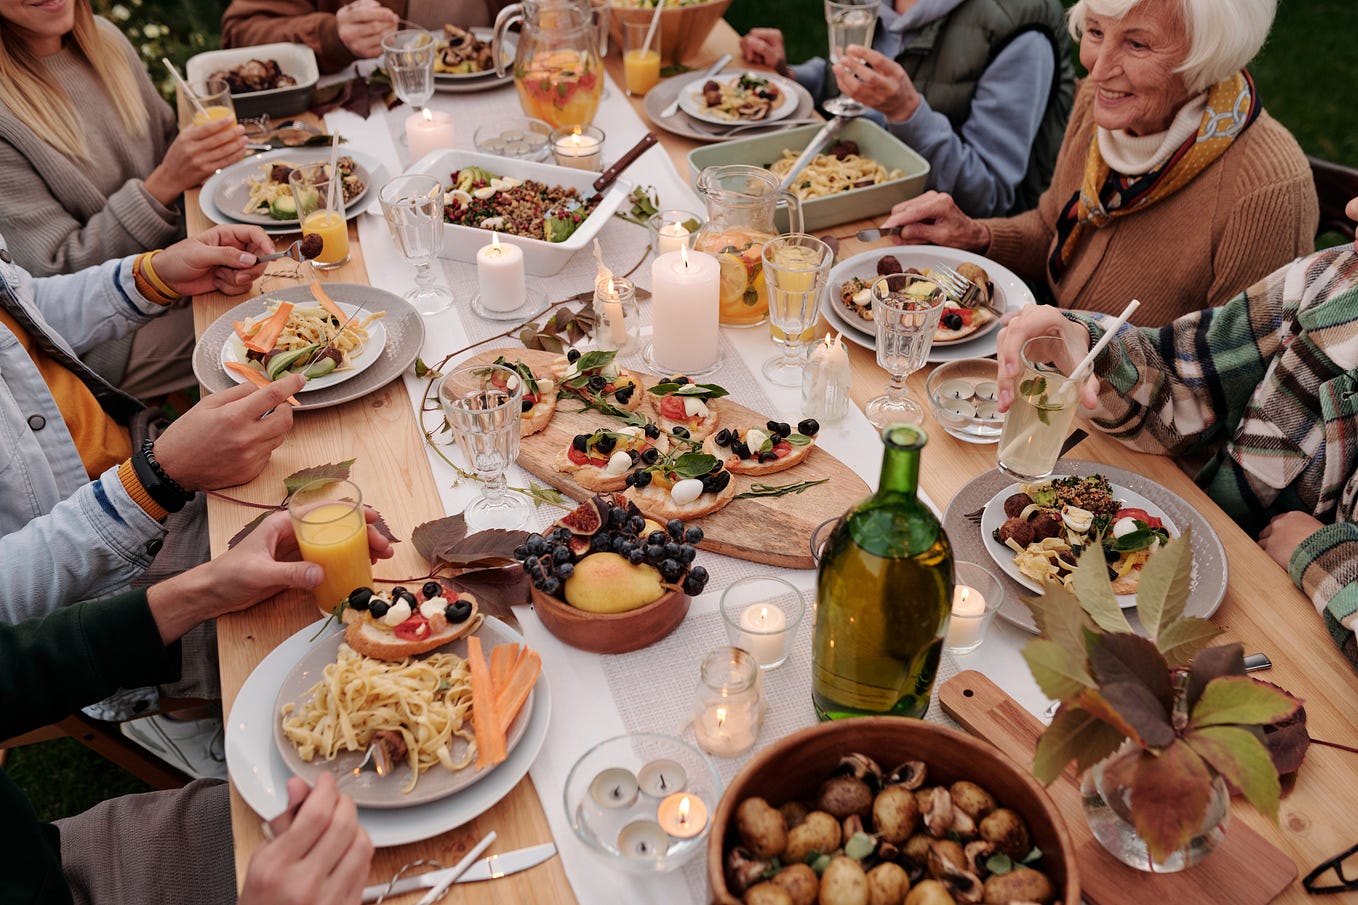 Can You Eat Mindfully At Social Gatherings?